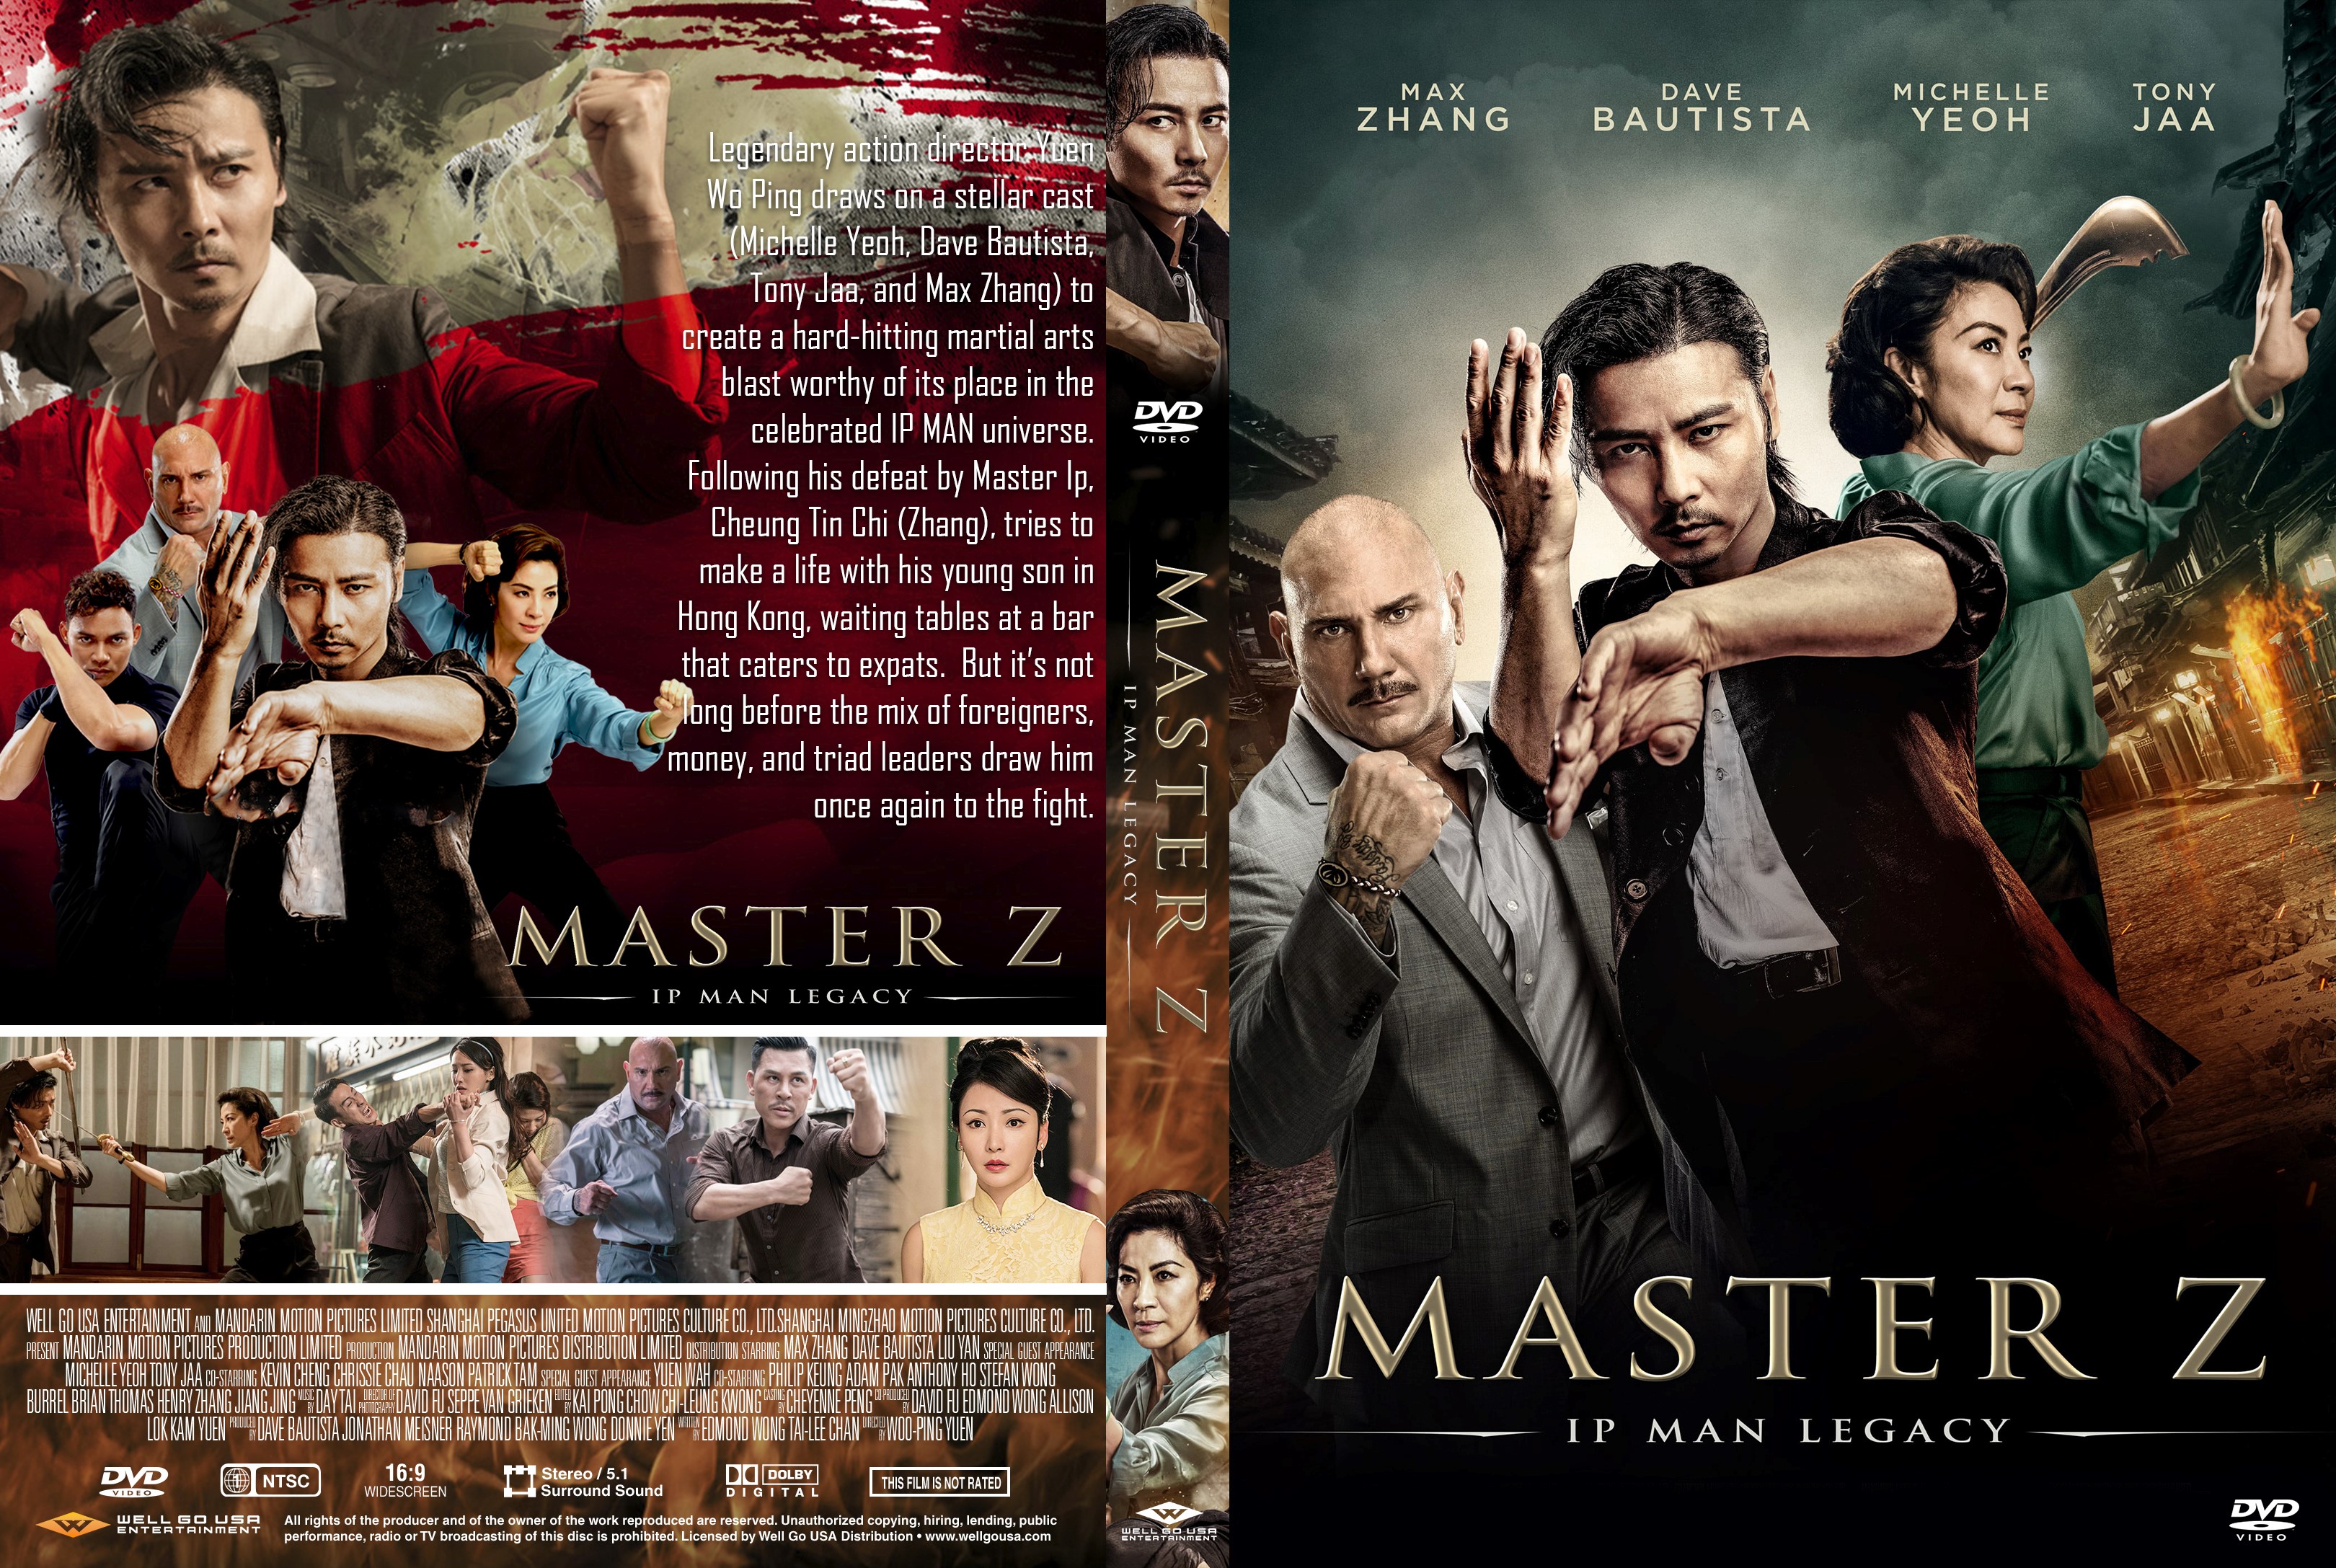 Master Z Ip Man Legacy Dvd Cover Cover Addict Free Dvd Bluray Covers And Movie Posters